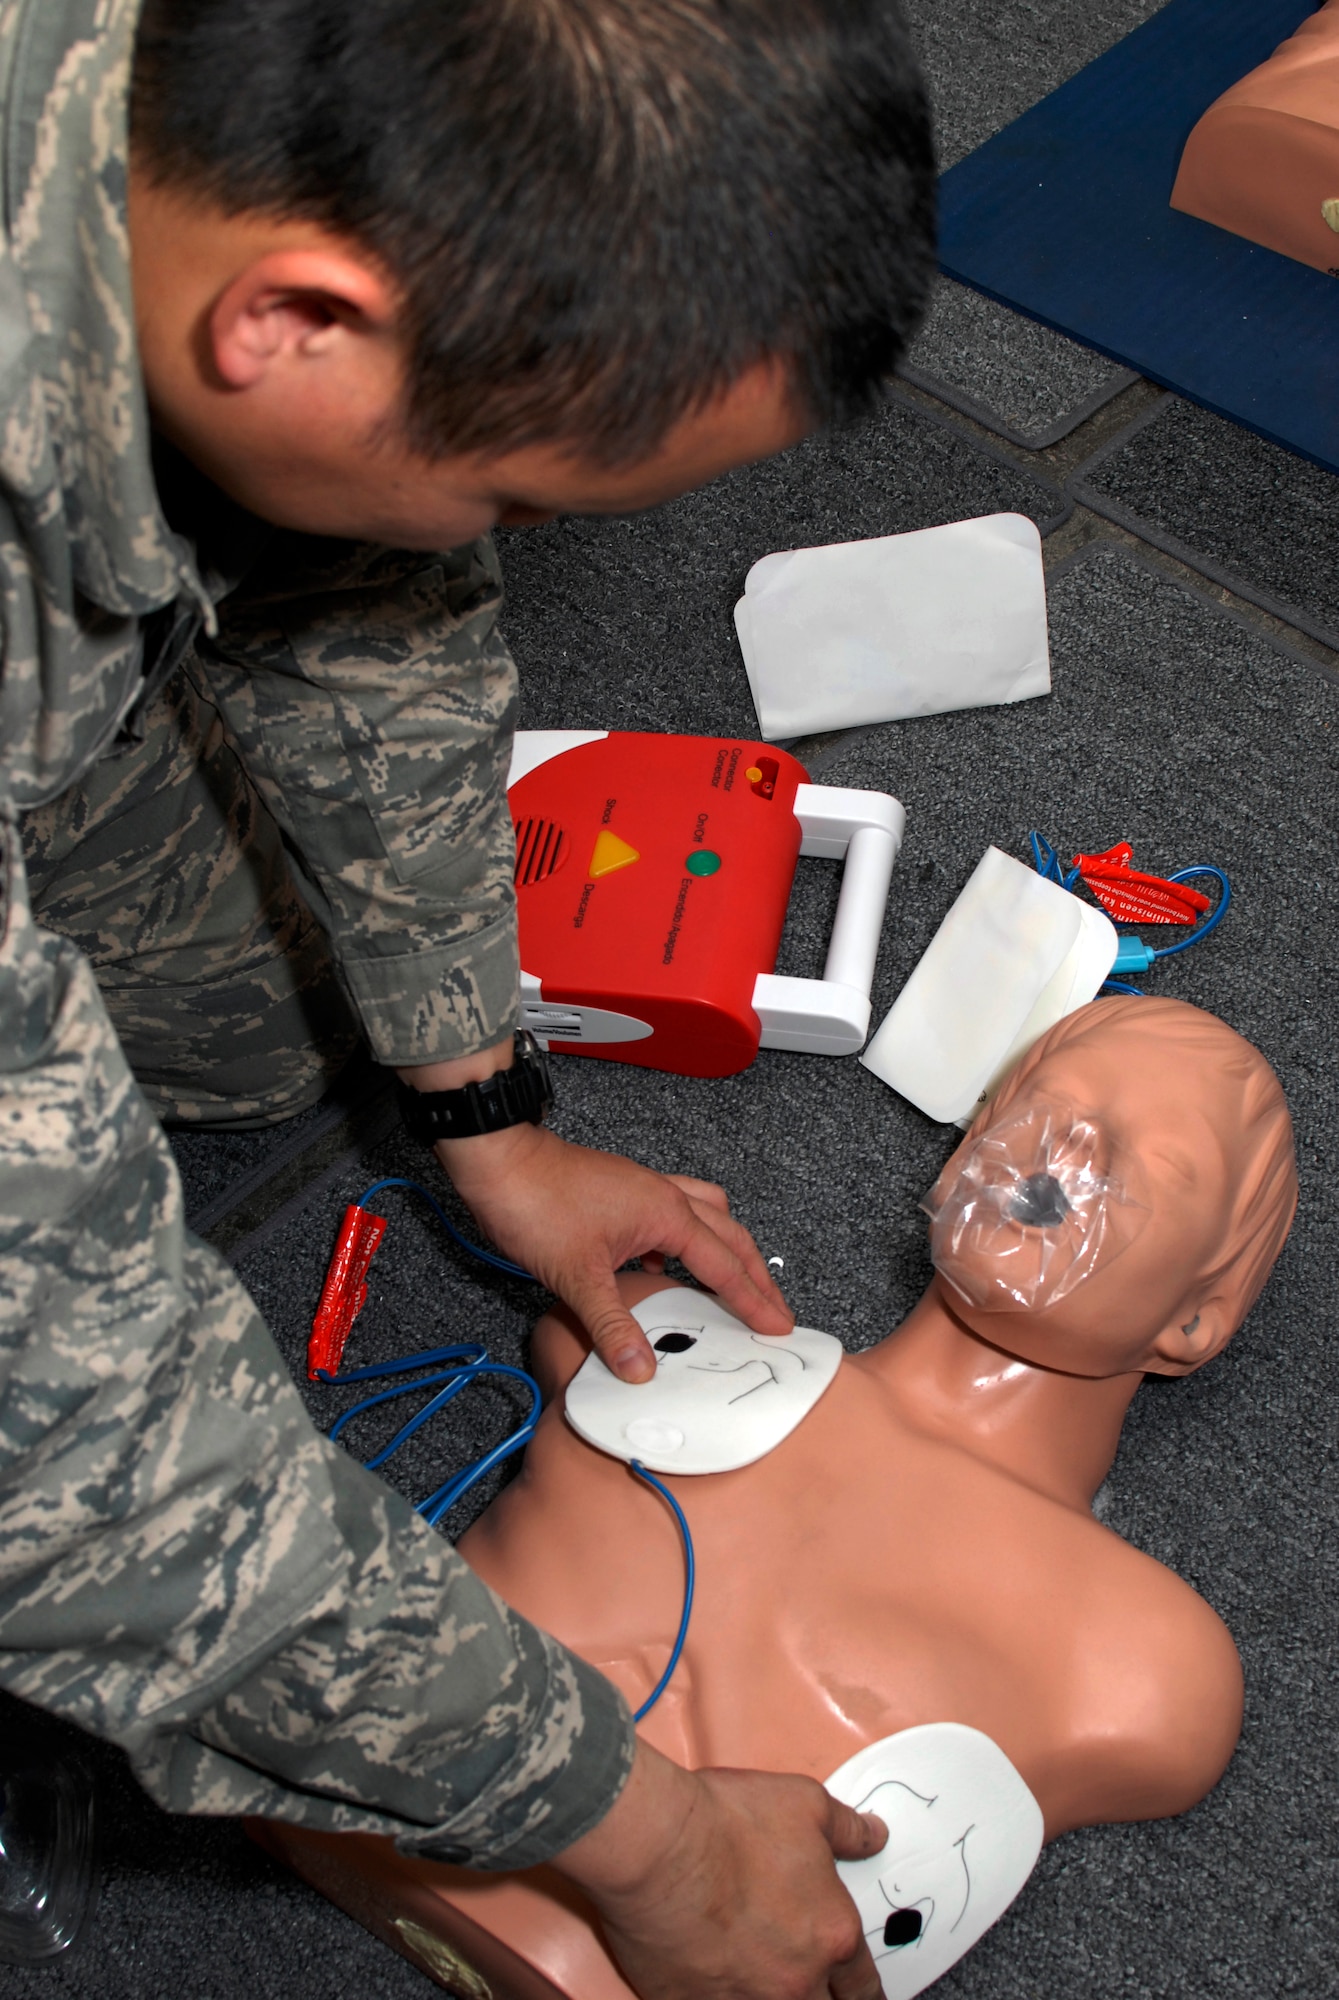 California Air National Guard Senior Airman Leonard Tran, utilizes an automated external defibrillator (AED) during CPR training, at Moffett Federal Airfield, Calif., Feb. 10, 2013. According to the American Red Cross an AED is the only effective treatment for restoring an irregular heart rhythm during sudden cardiac arrest. (Air National Guard photo by Staff Sgt. Kim E. Ramirez)